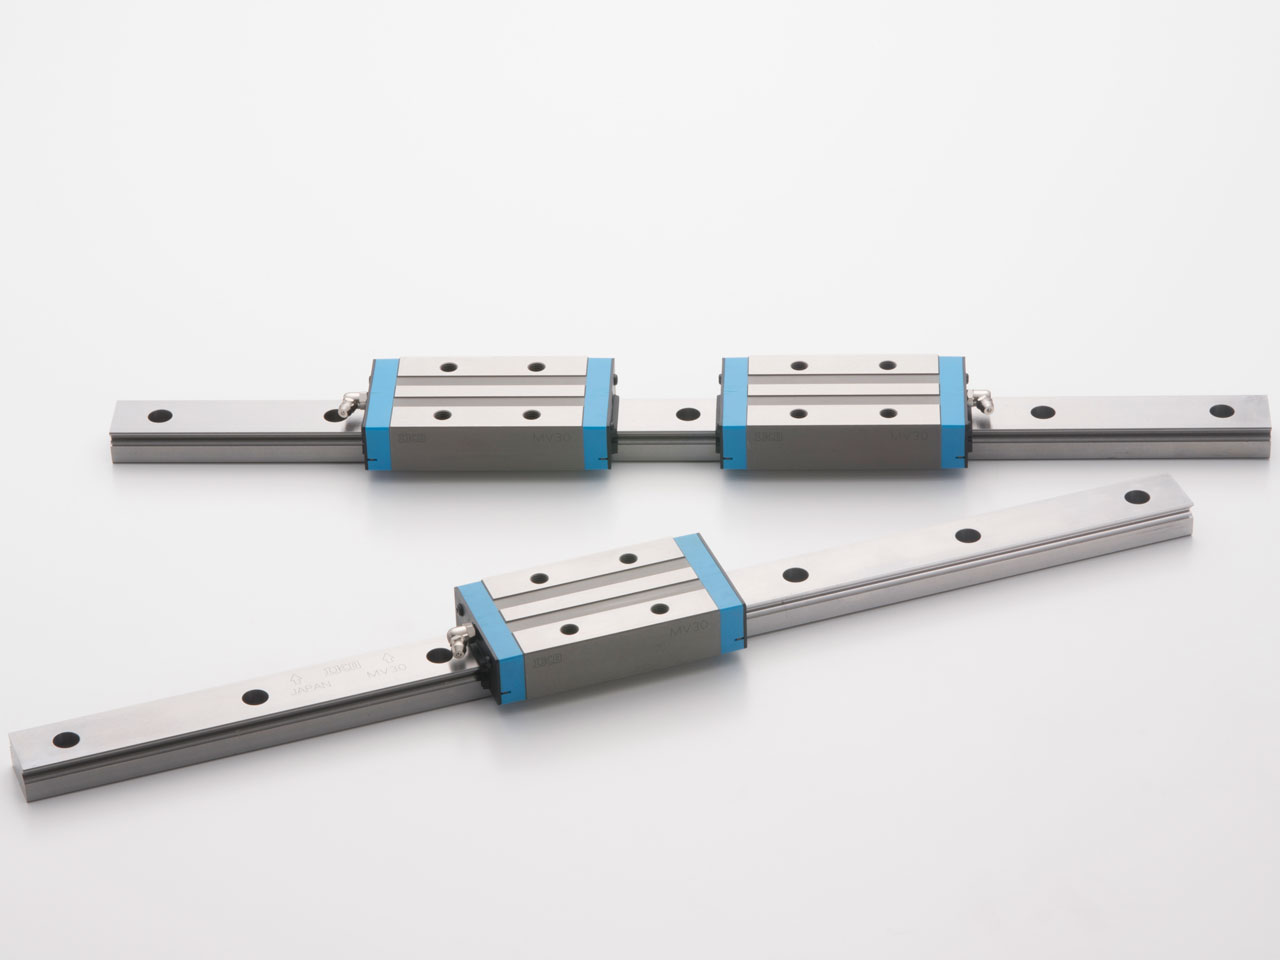 Details about   New IKO LXL25 B Linear Slide